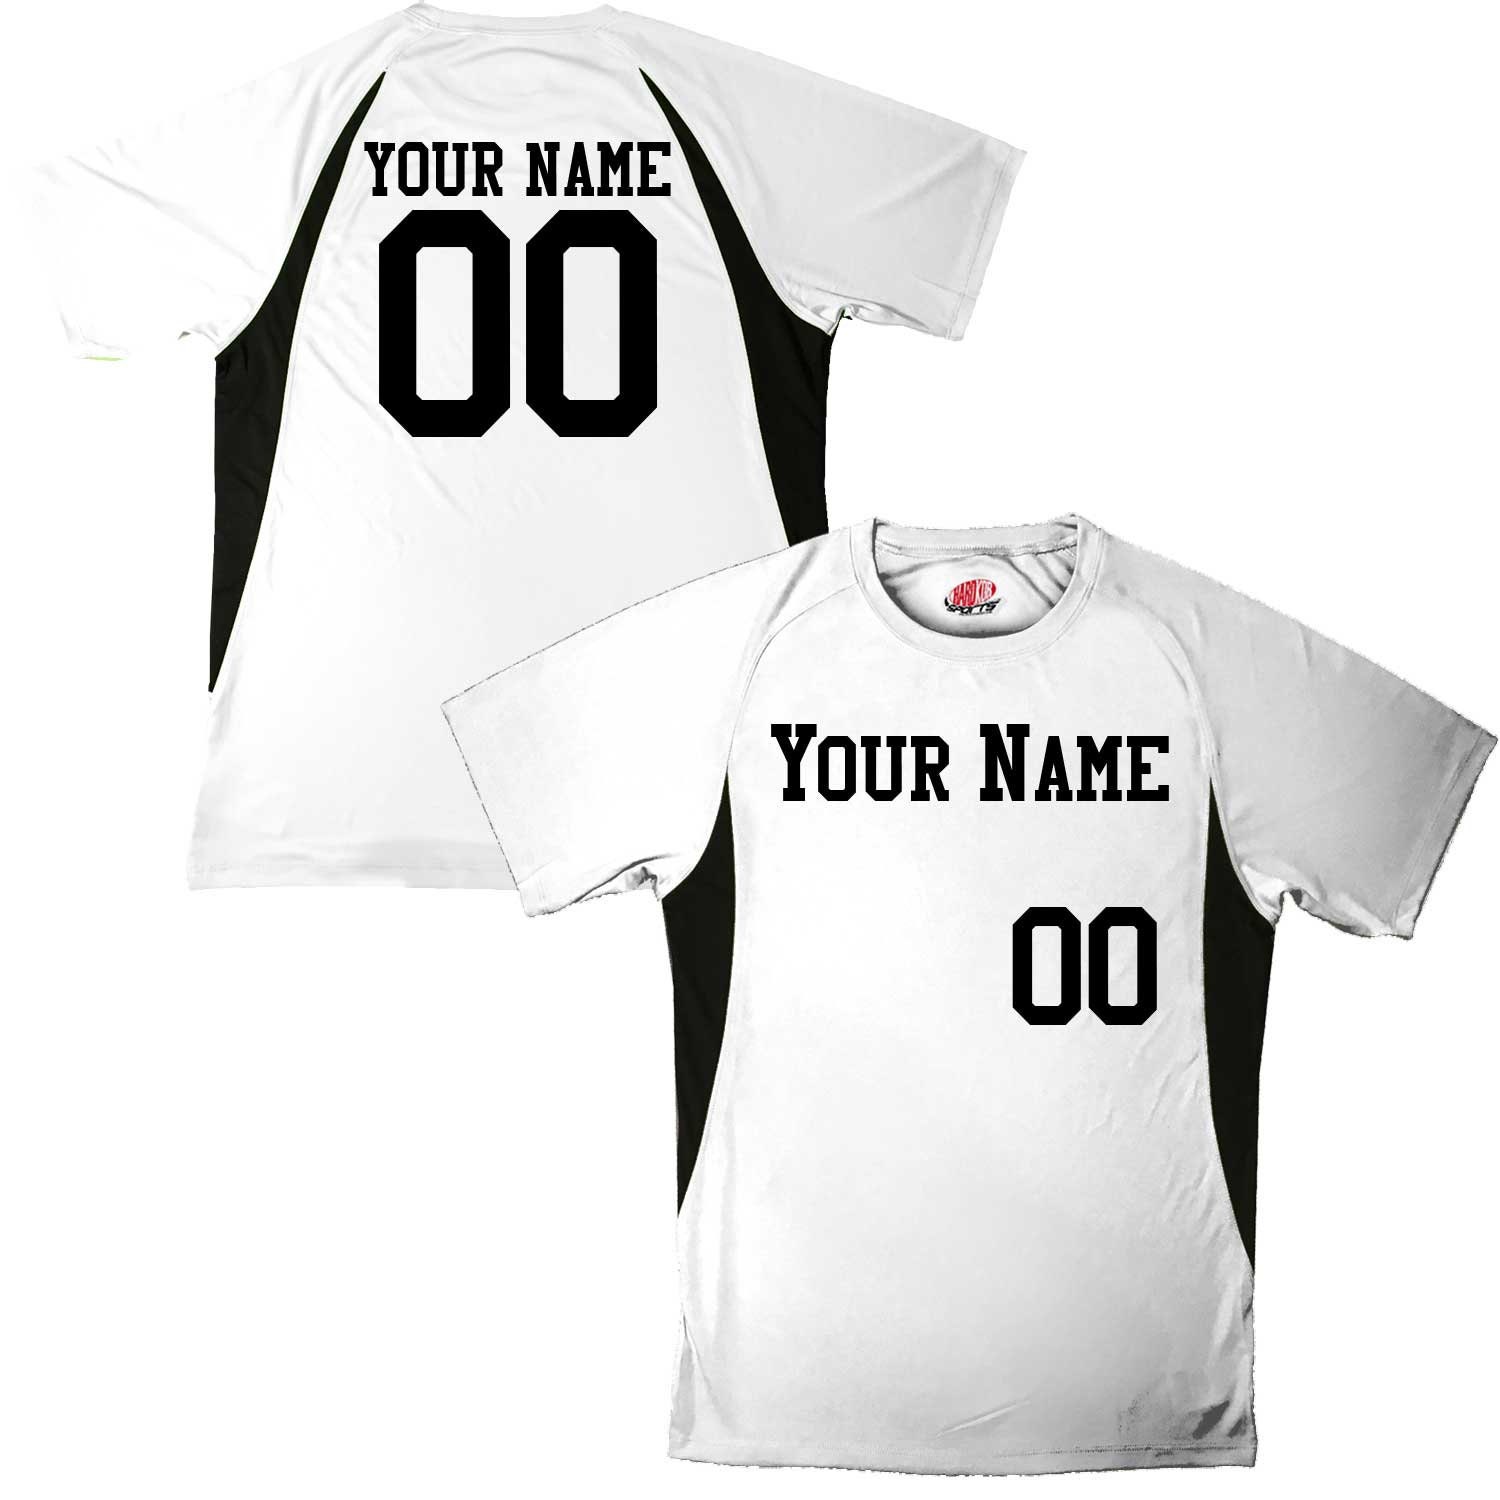 Hardkor Sports Custom Football Jersey for Men You Design Online with Your Names and Numbers